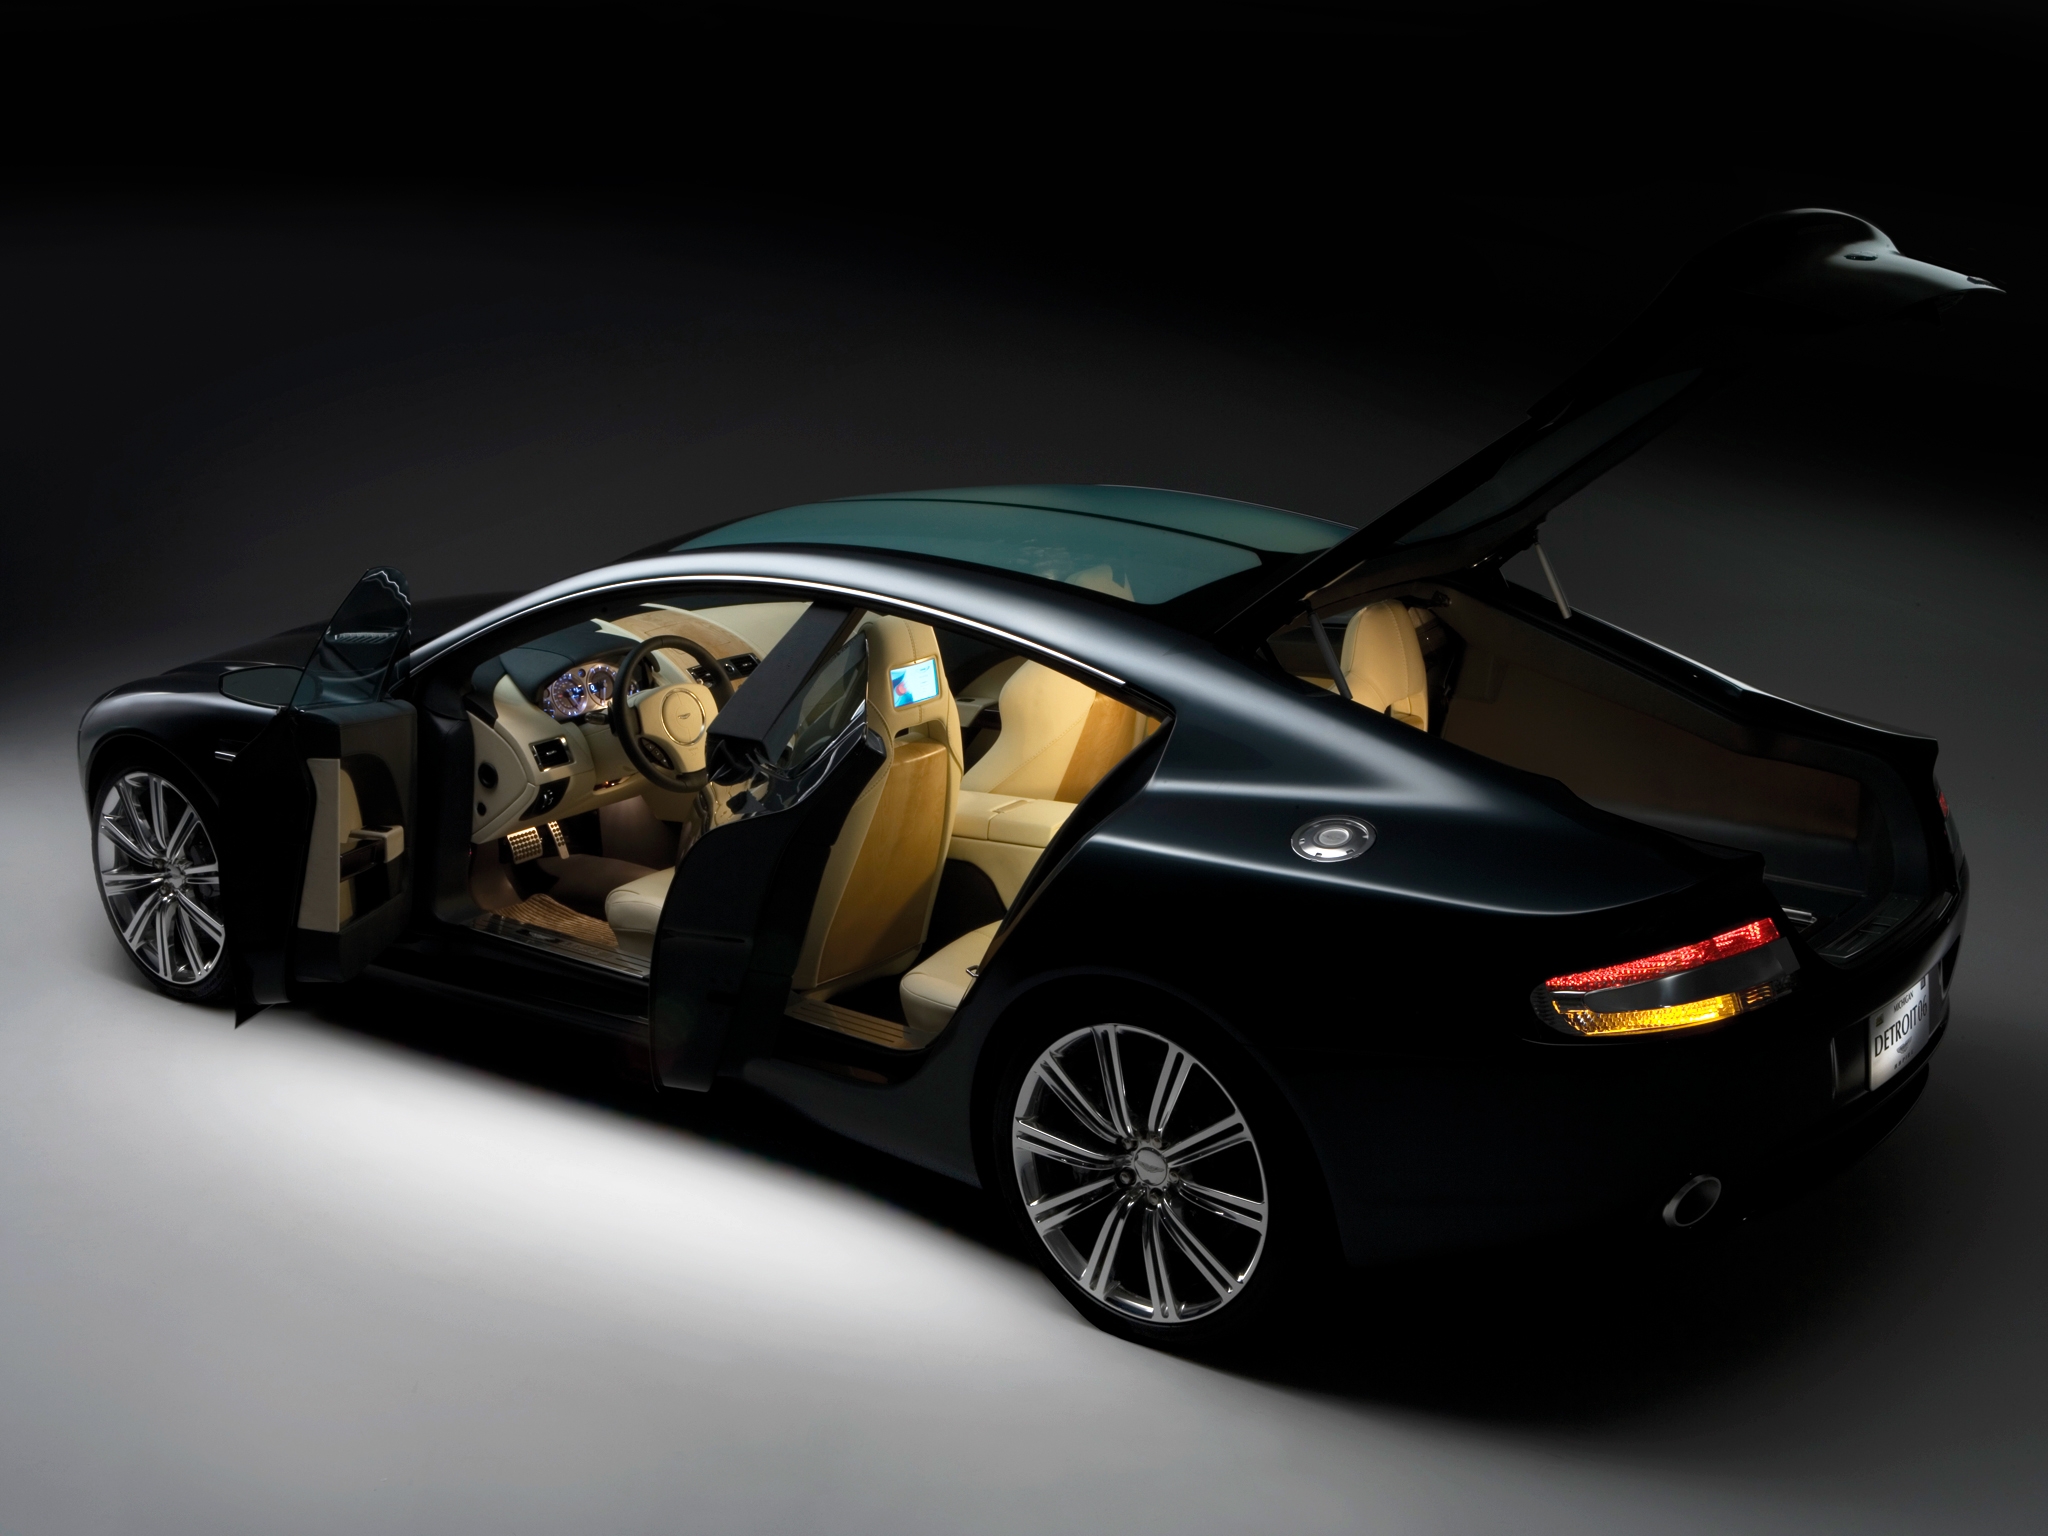 cars, aston martin, black, side view, style, concept car, 2006, rapide